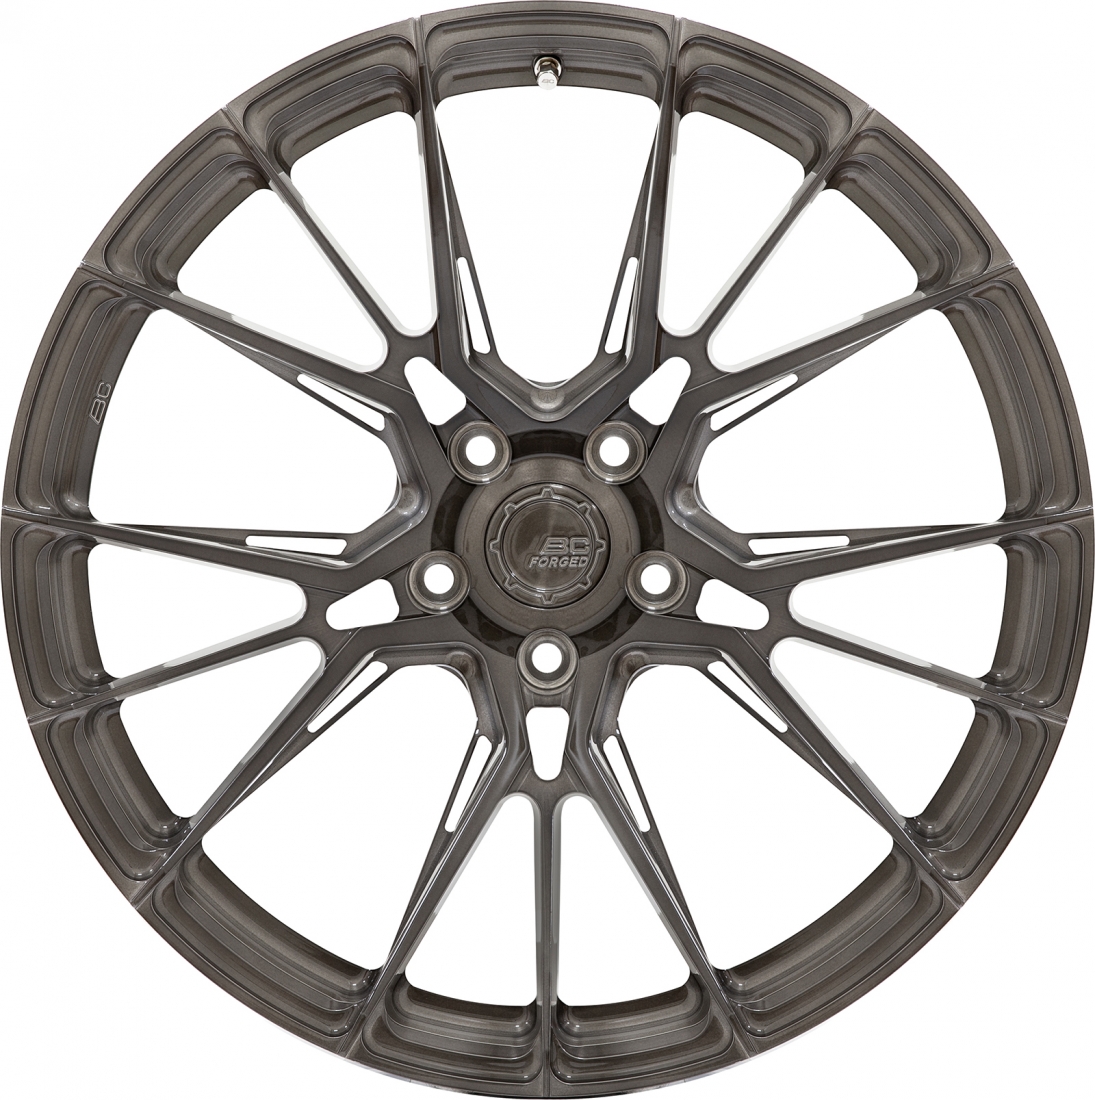 2020-23 BC Forged EH184 Wheels for C8 Corvette, Set of 4